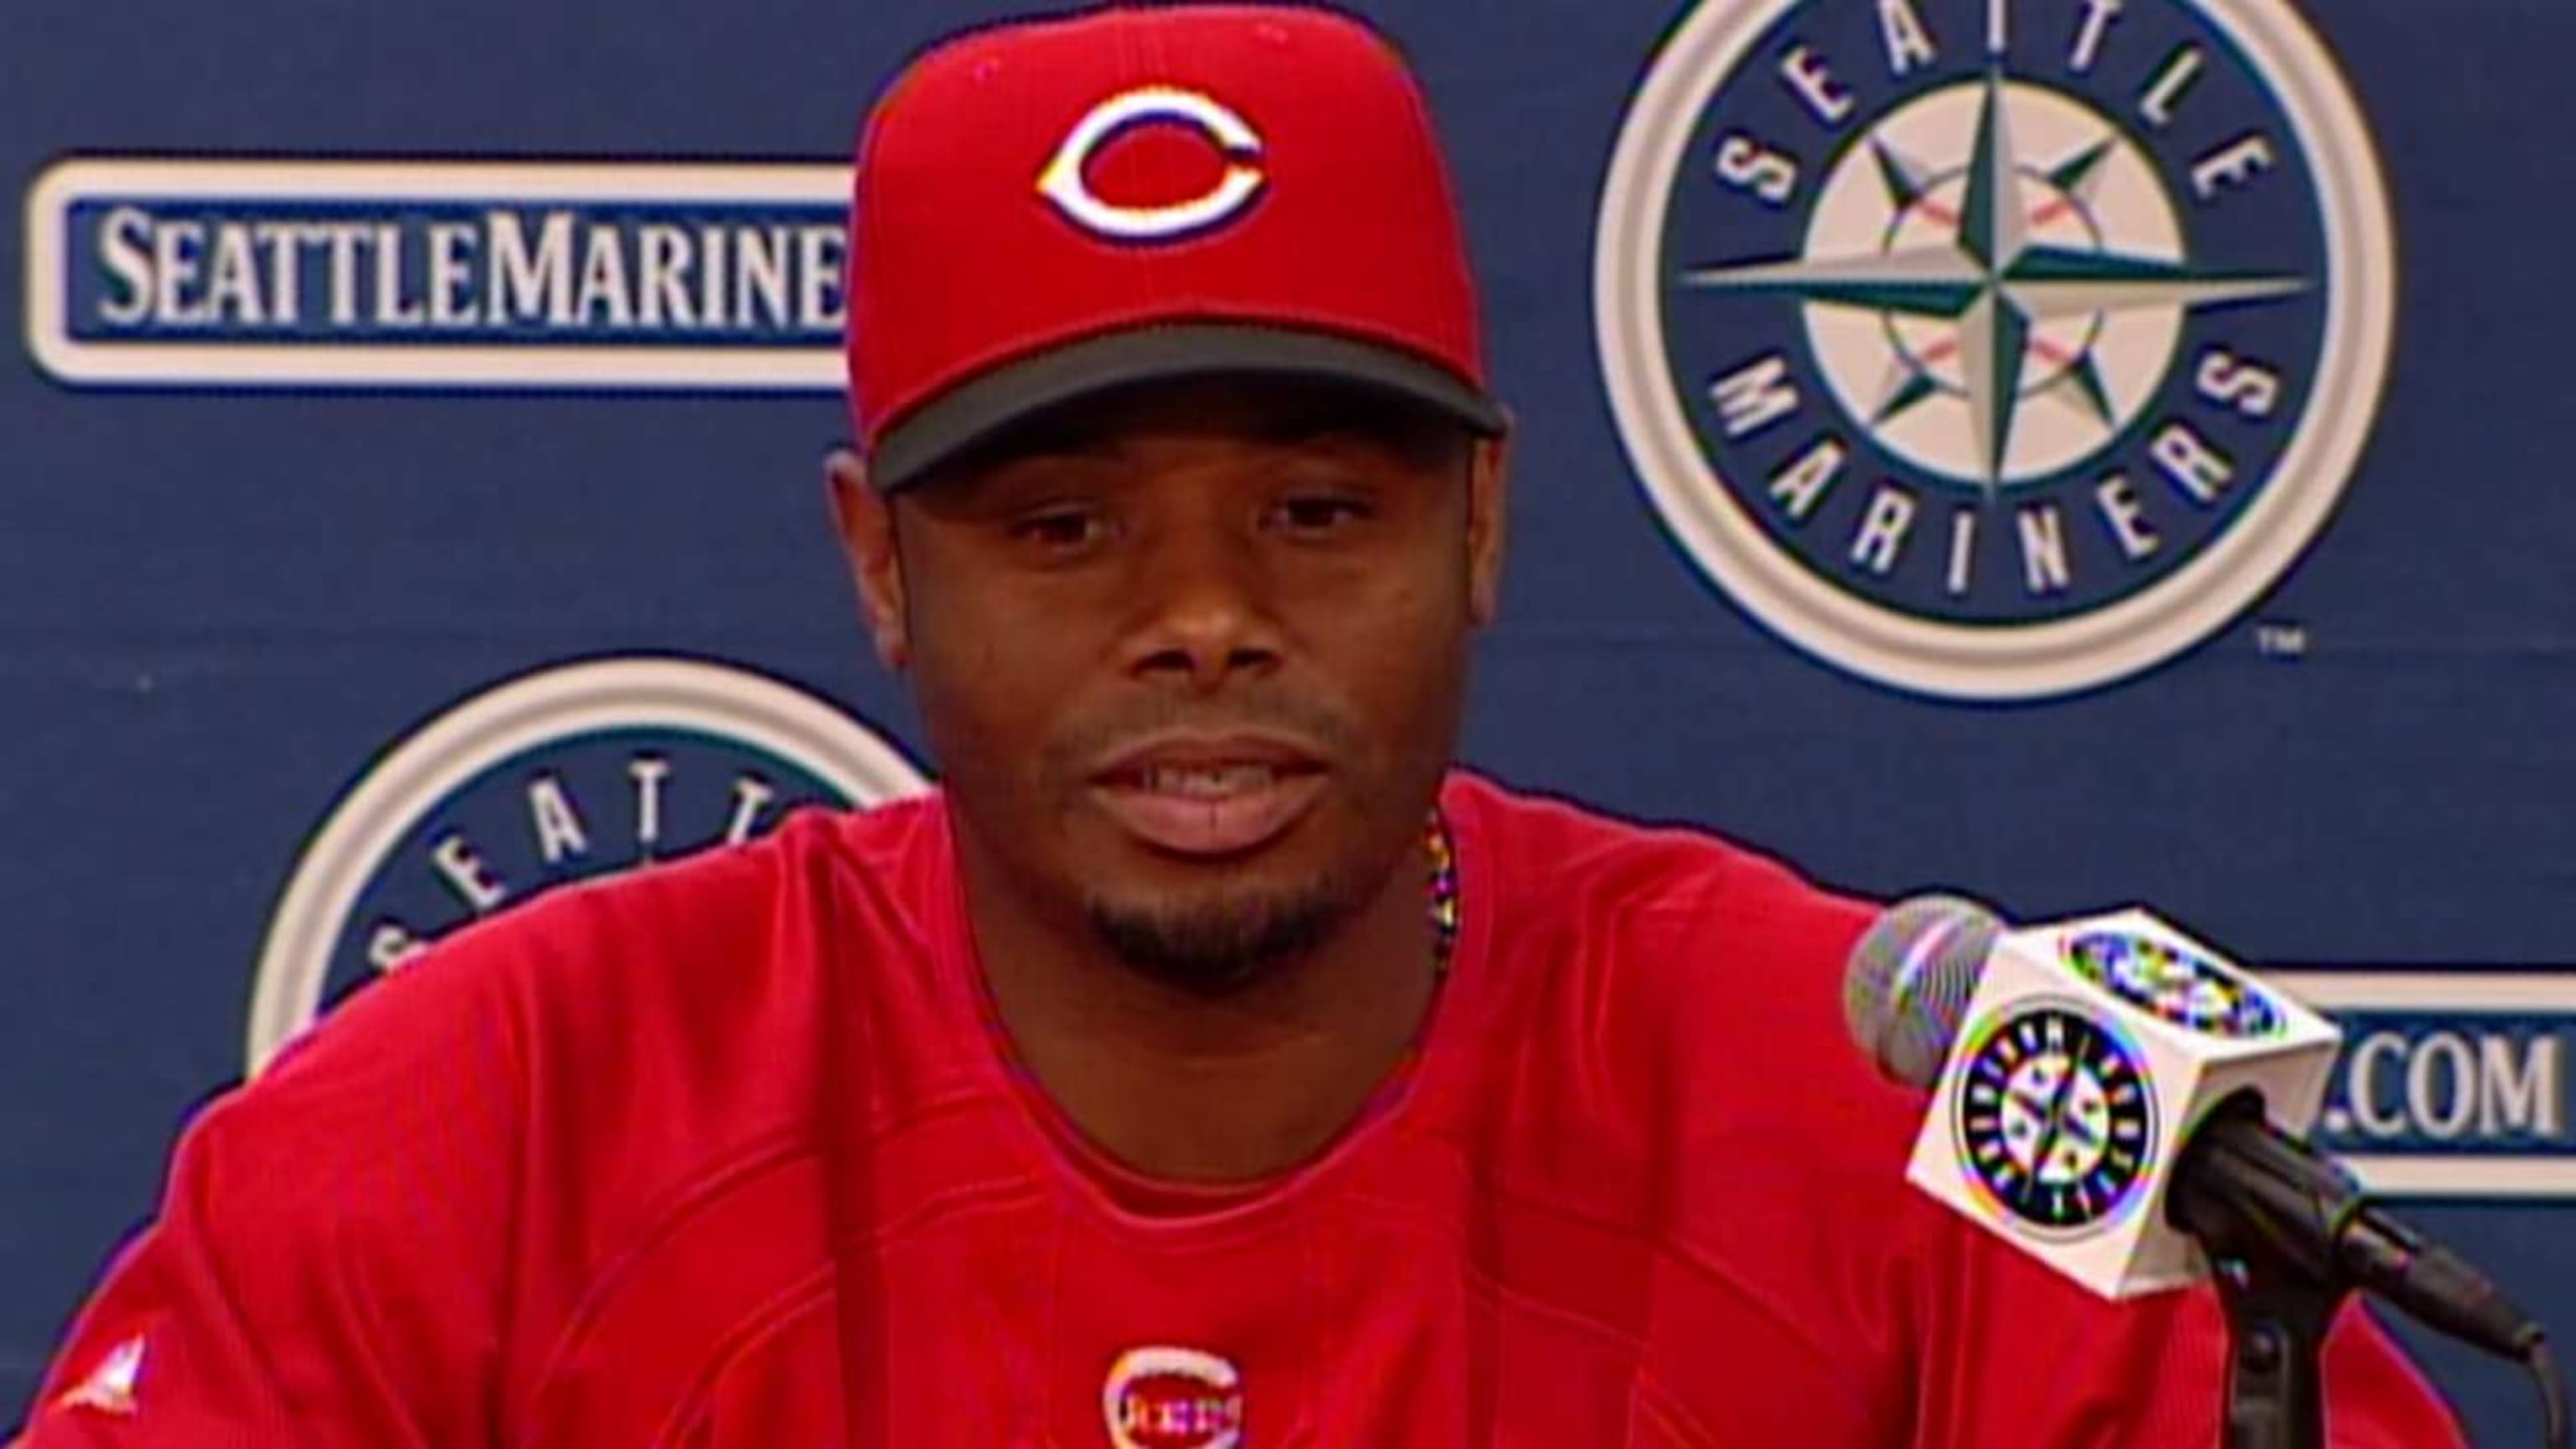 On this day in 2000, the Cincinnati Reds traded for Ken Griffey Jr.